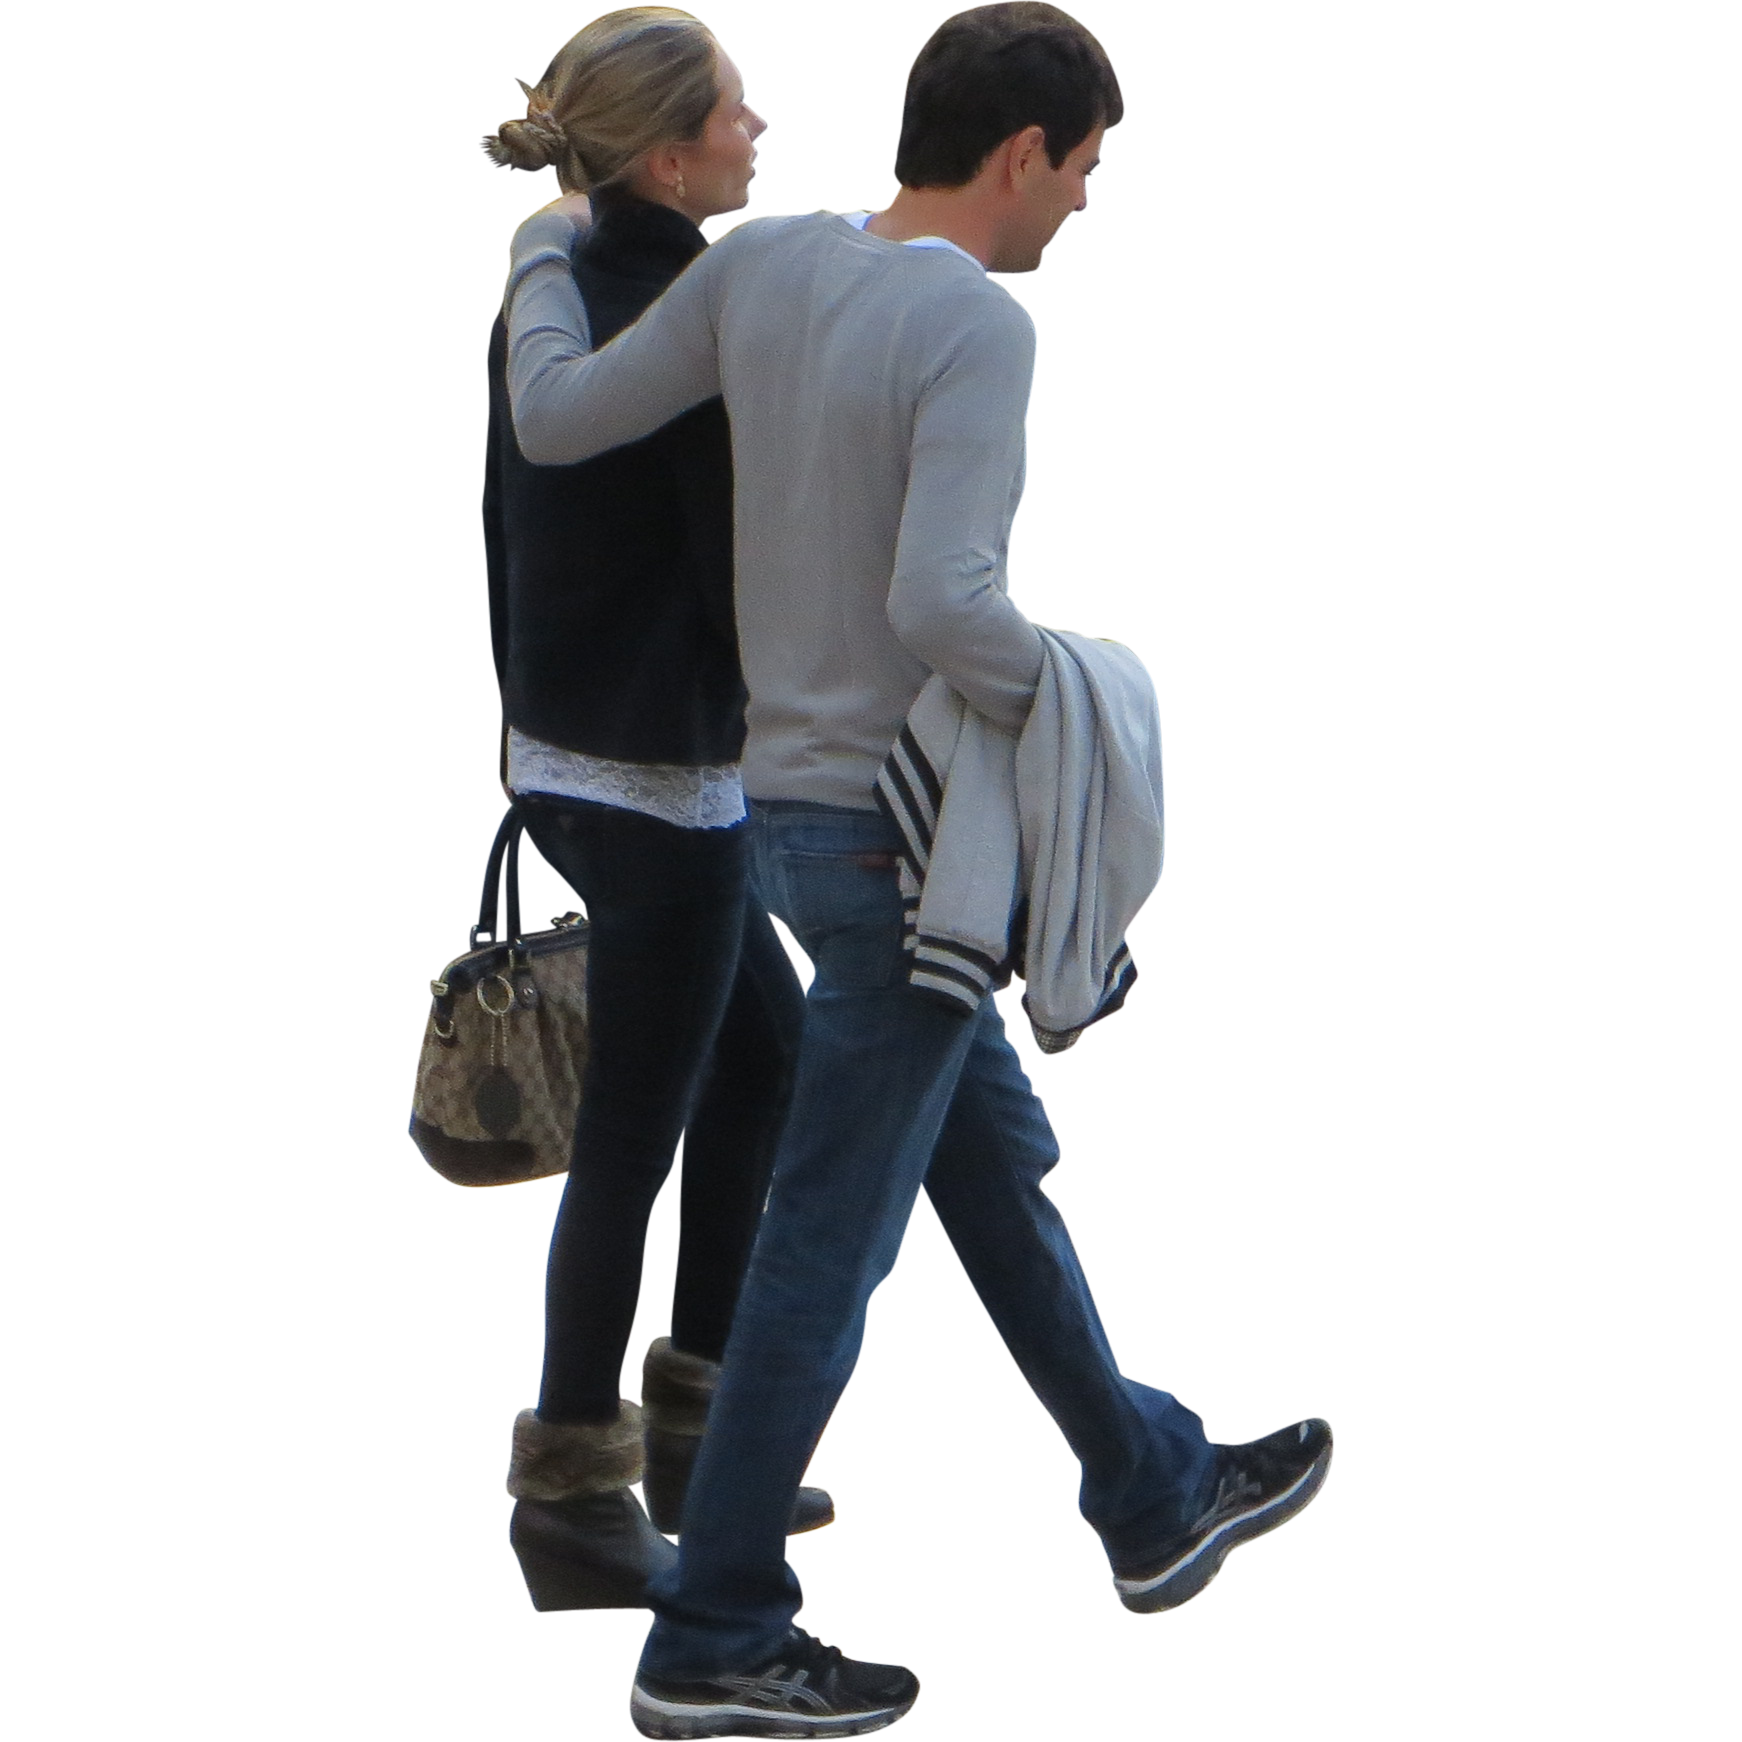 Walking couple people png #32494 - Free Icons and PNG ... - 1742 x 1742 png 1310kB